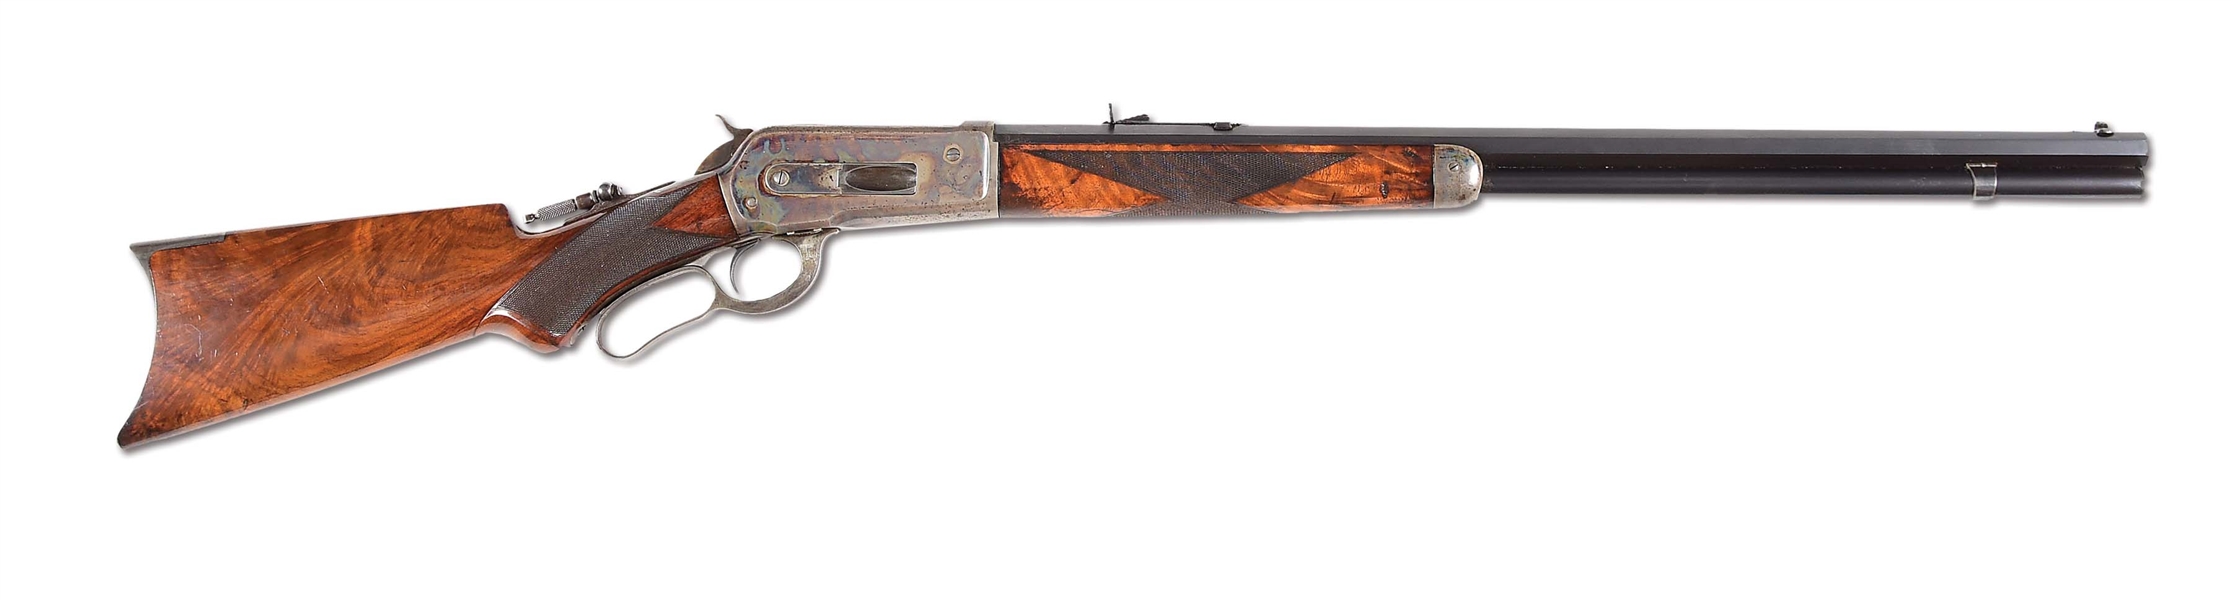 (A) WINCHESTER DELUXE MODEL 1886 "BIG 50" EXPRESS RIFLE WITH FACTORY LETTER(1894).